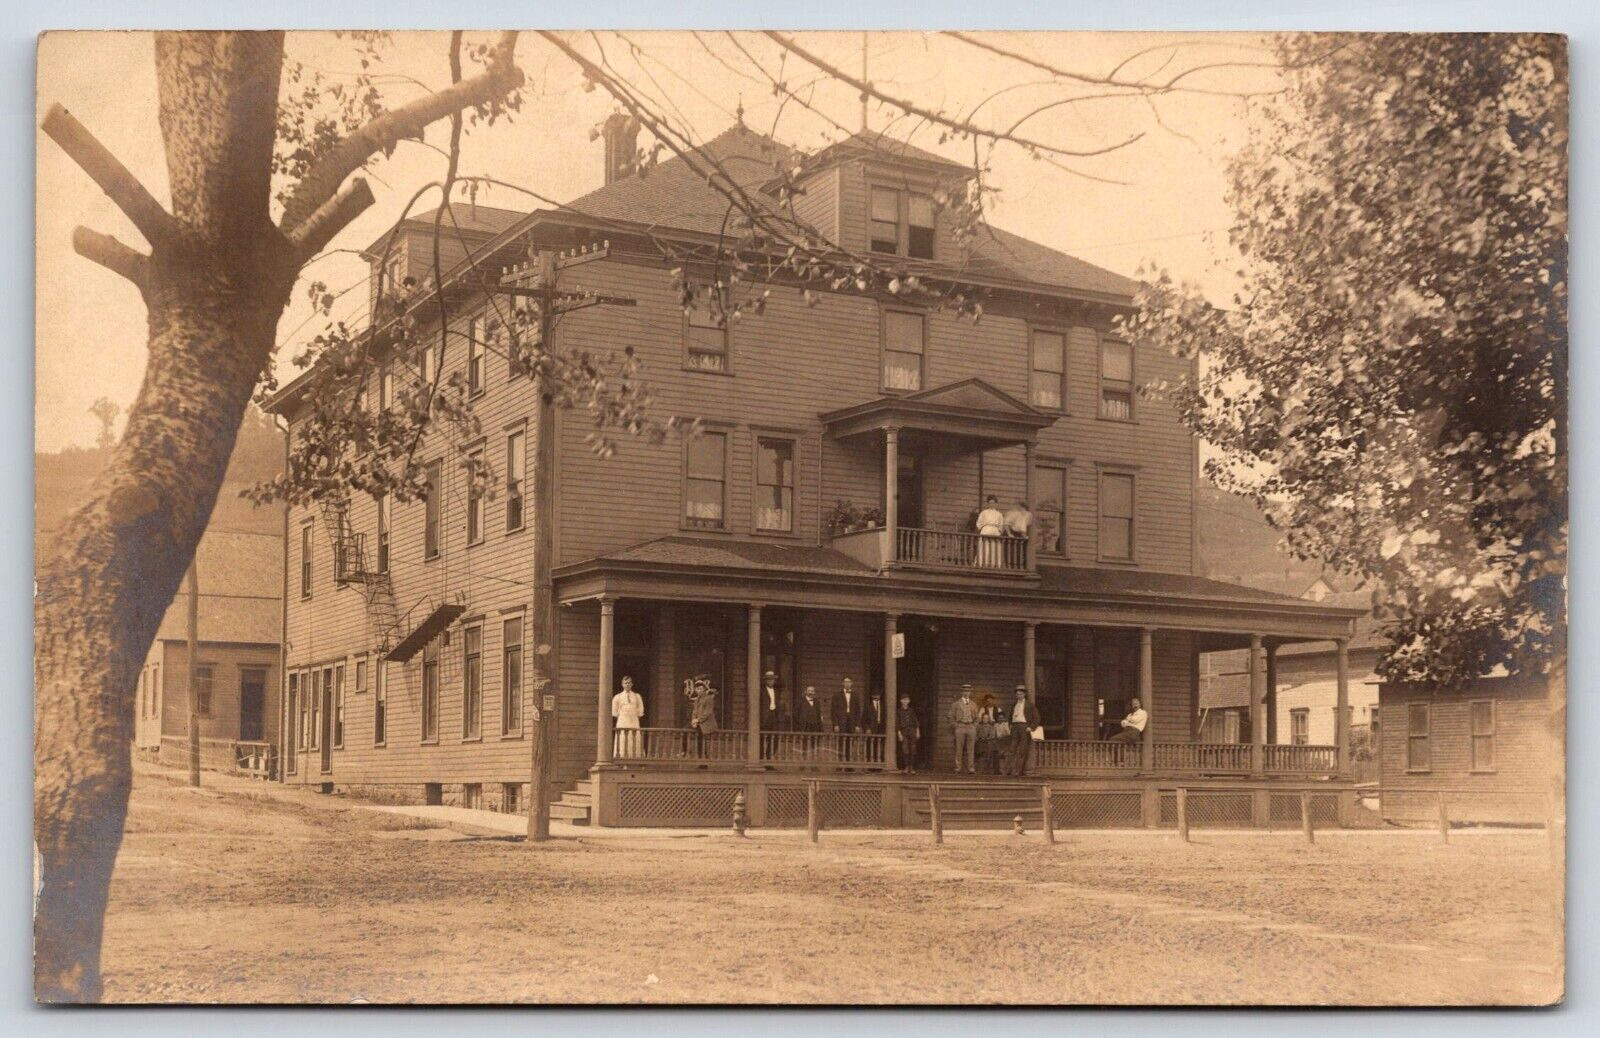 RPPC Well Dressed People Posing on Porch & Balcony of Large Home c1930 A24